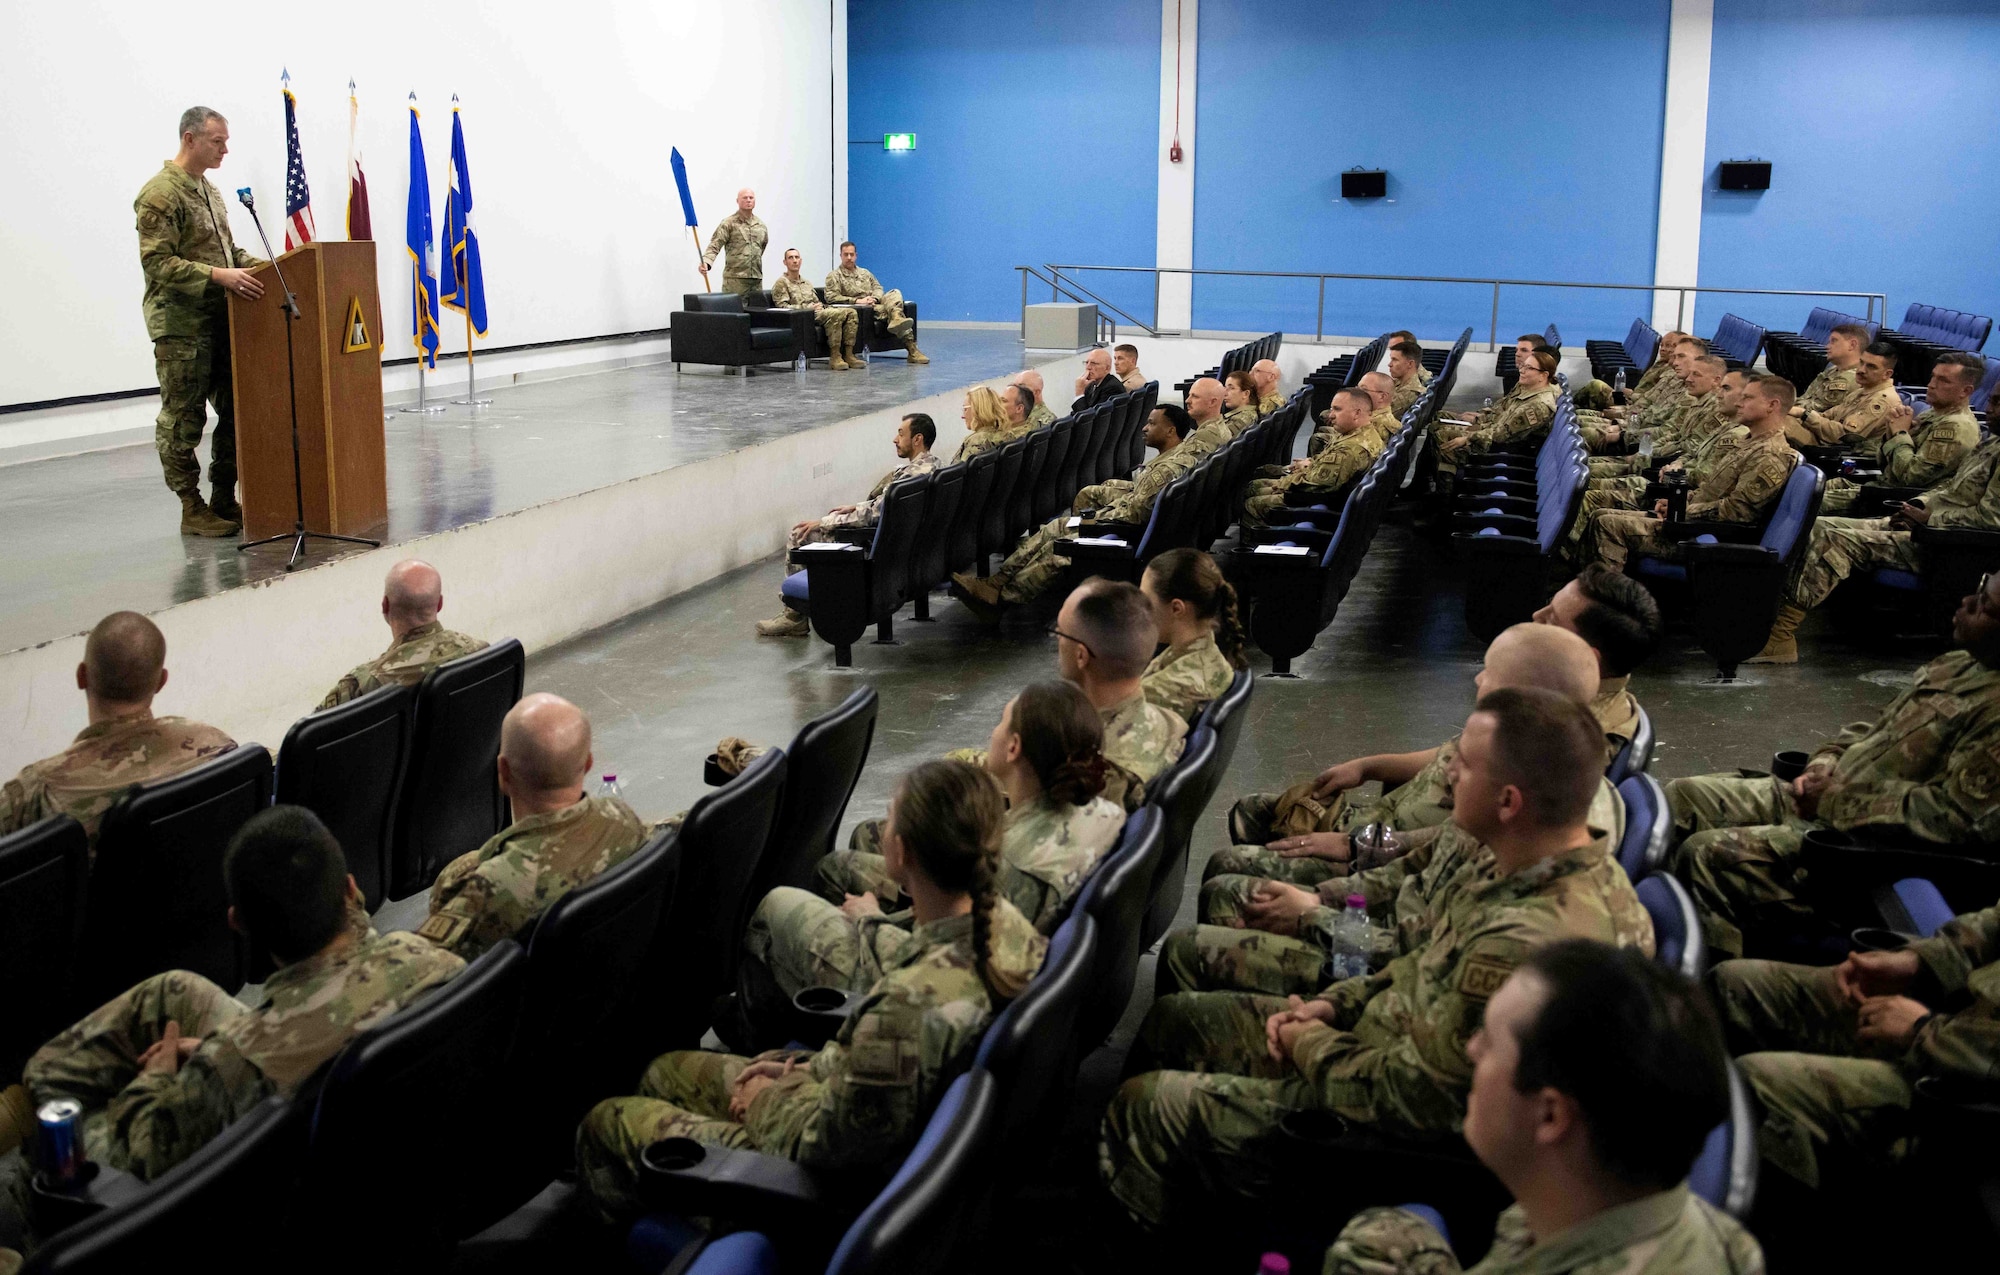 U.S. Air Force Lt. Gen. Alexus Grynkewich, 9th Air Force (Air Forces Central) commander, and Combined Forces Air Component Commander for U.S. Central Command, left, speaks during the 1st Expeditionary Theater Support Group activation and change of command ceremony July 3, 2023, at Al Udeid Air Base, Qatar. Since its inception in March, the ETSG has successfully conducted missions across 12 different bases in eight countries. The group consists of multi-capable Airmen with expertise from engineering, logistics and communications to conduct more effective warfighting missions. (U.S. Air Force photo by Staff Sgt. Jennifer Zima)